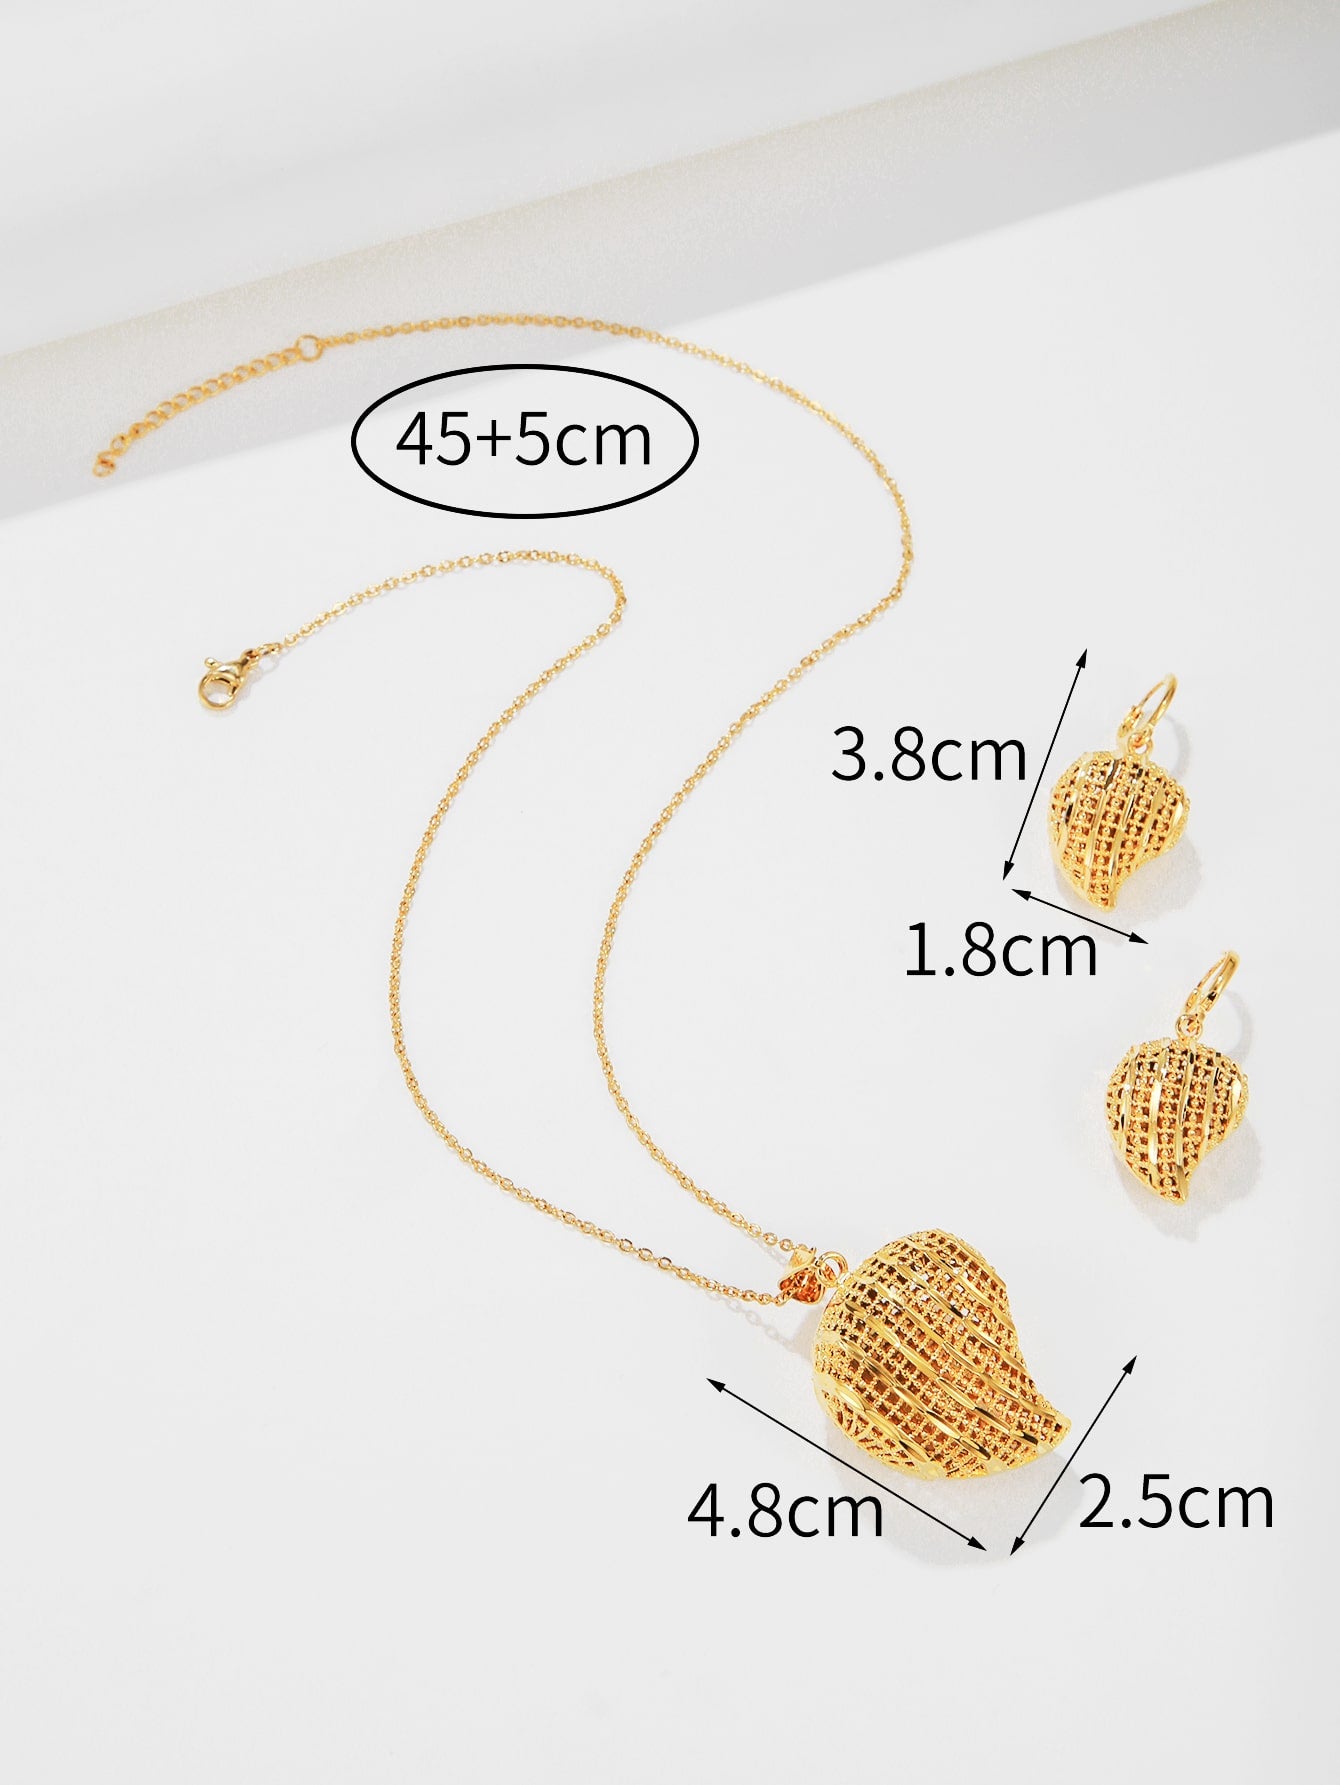 Simple Style Round Flower Copper Plating 18k Gold Plated Jewelry Set